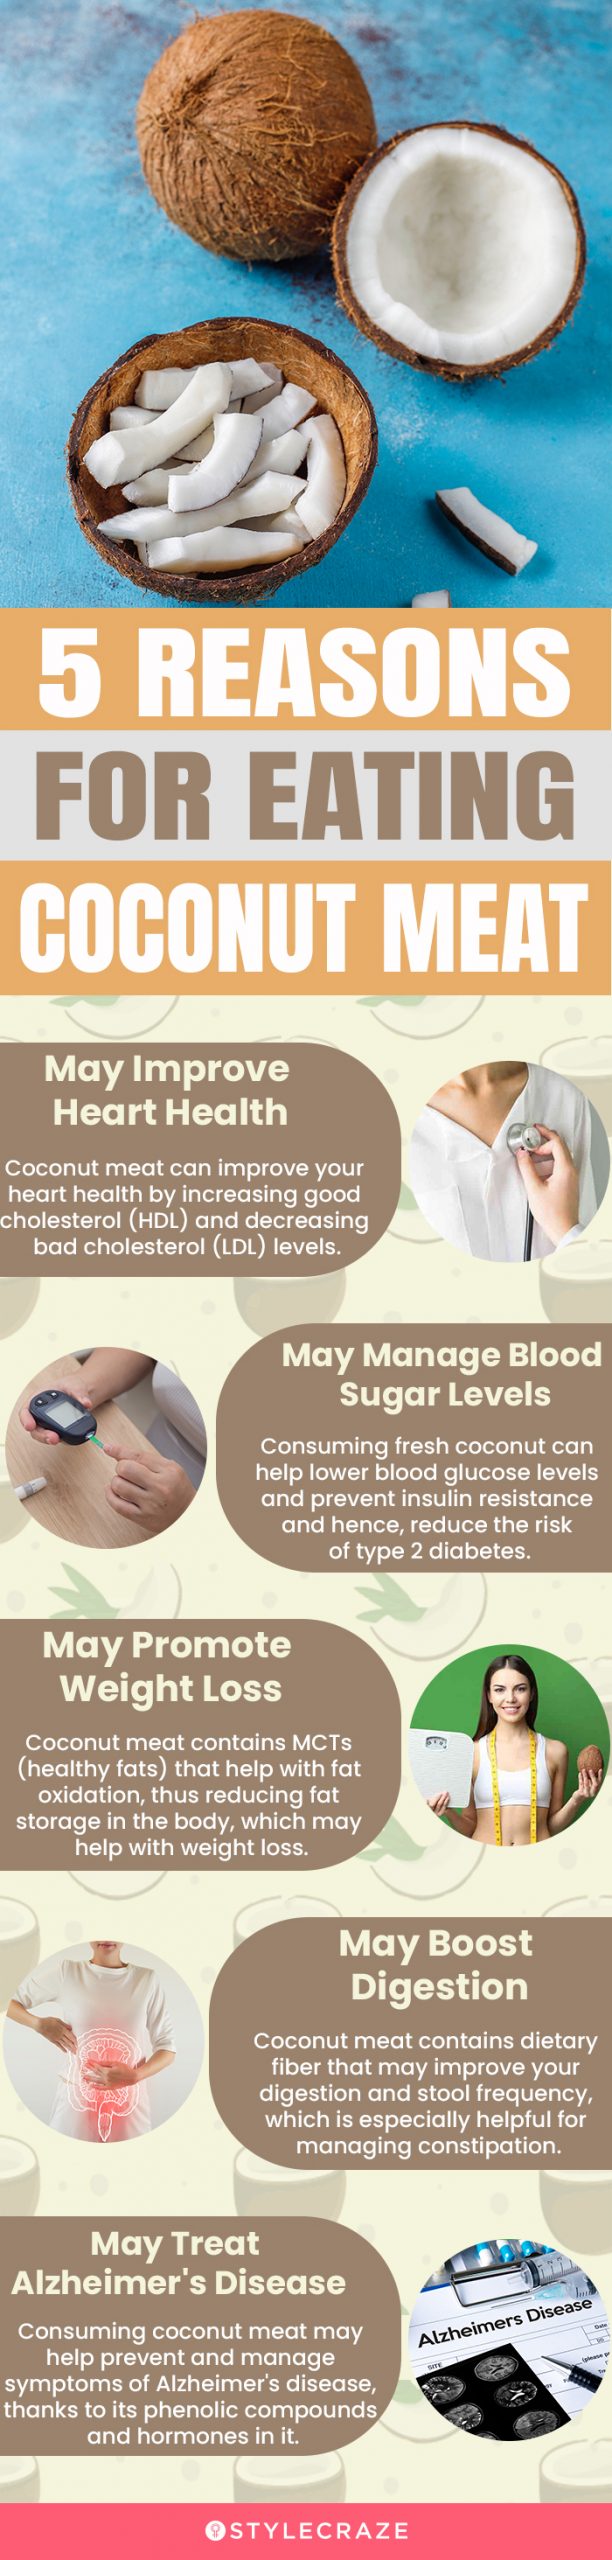 5 reasons for eating coconut meat (infographic)